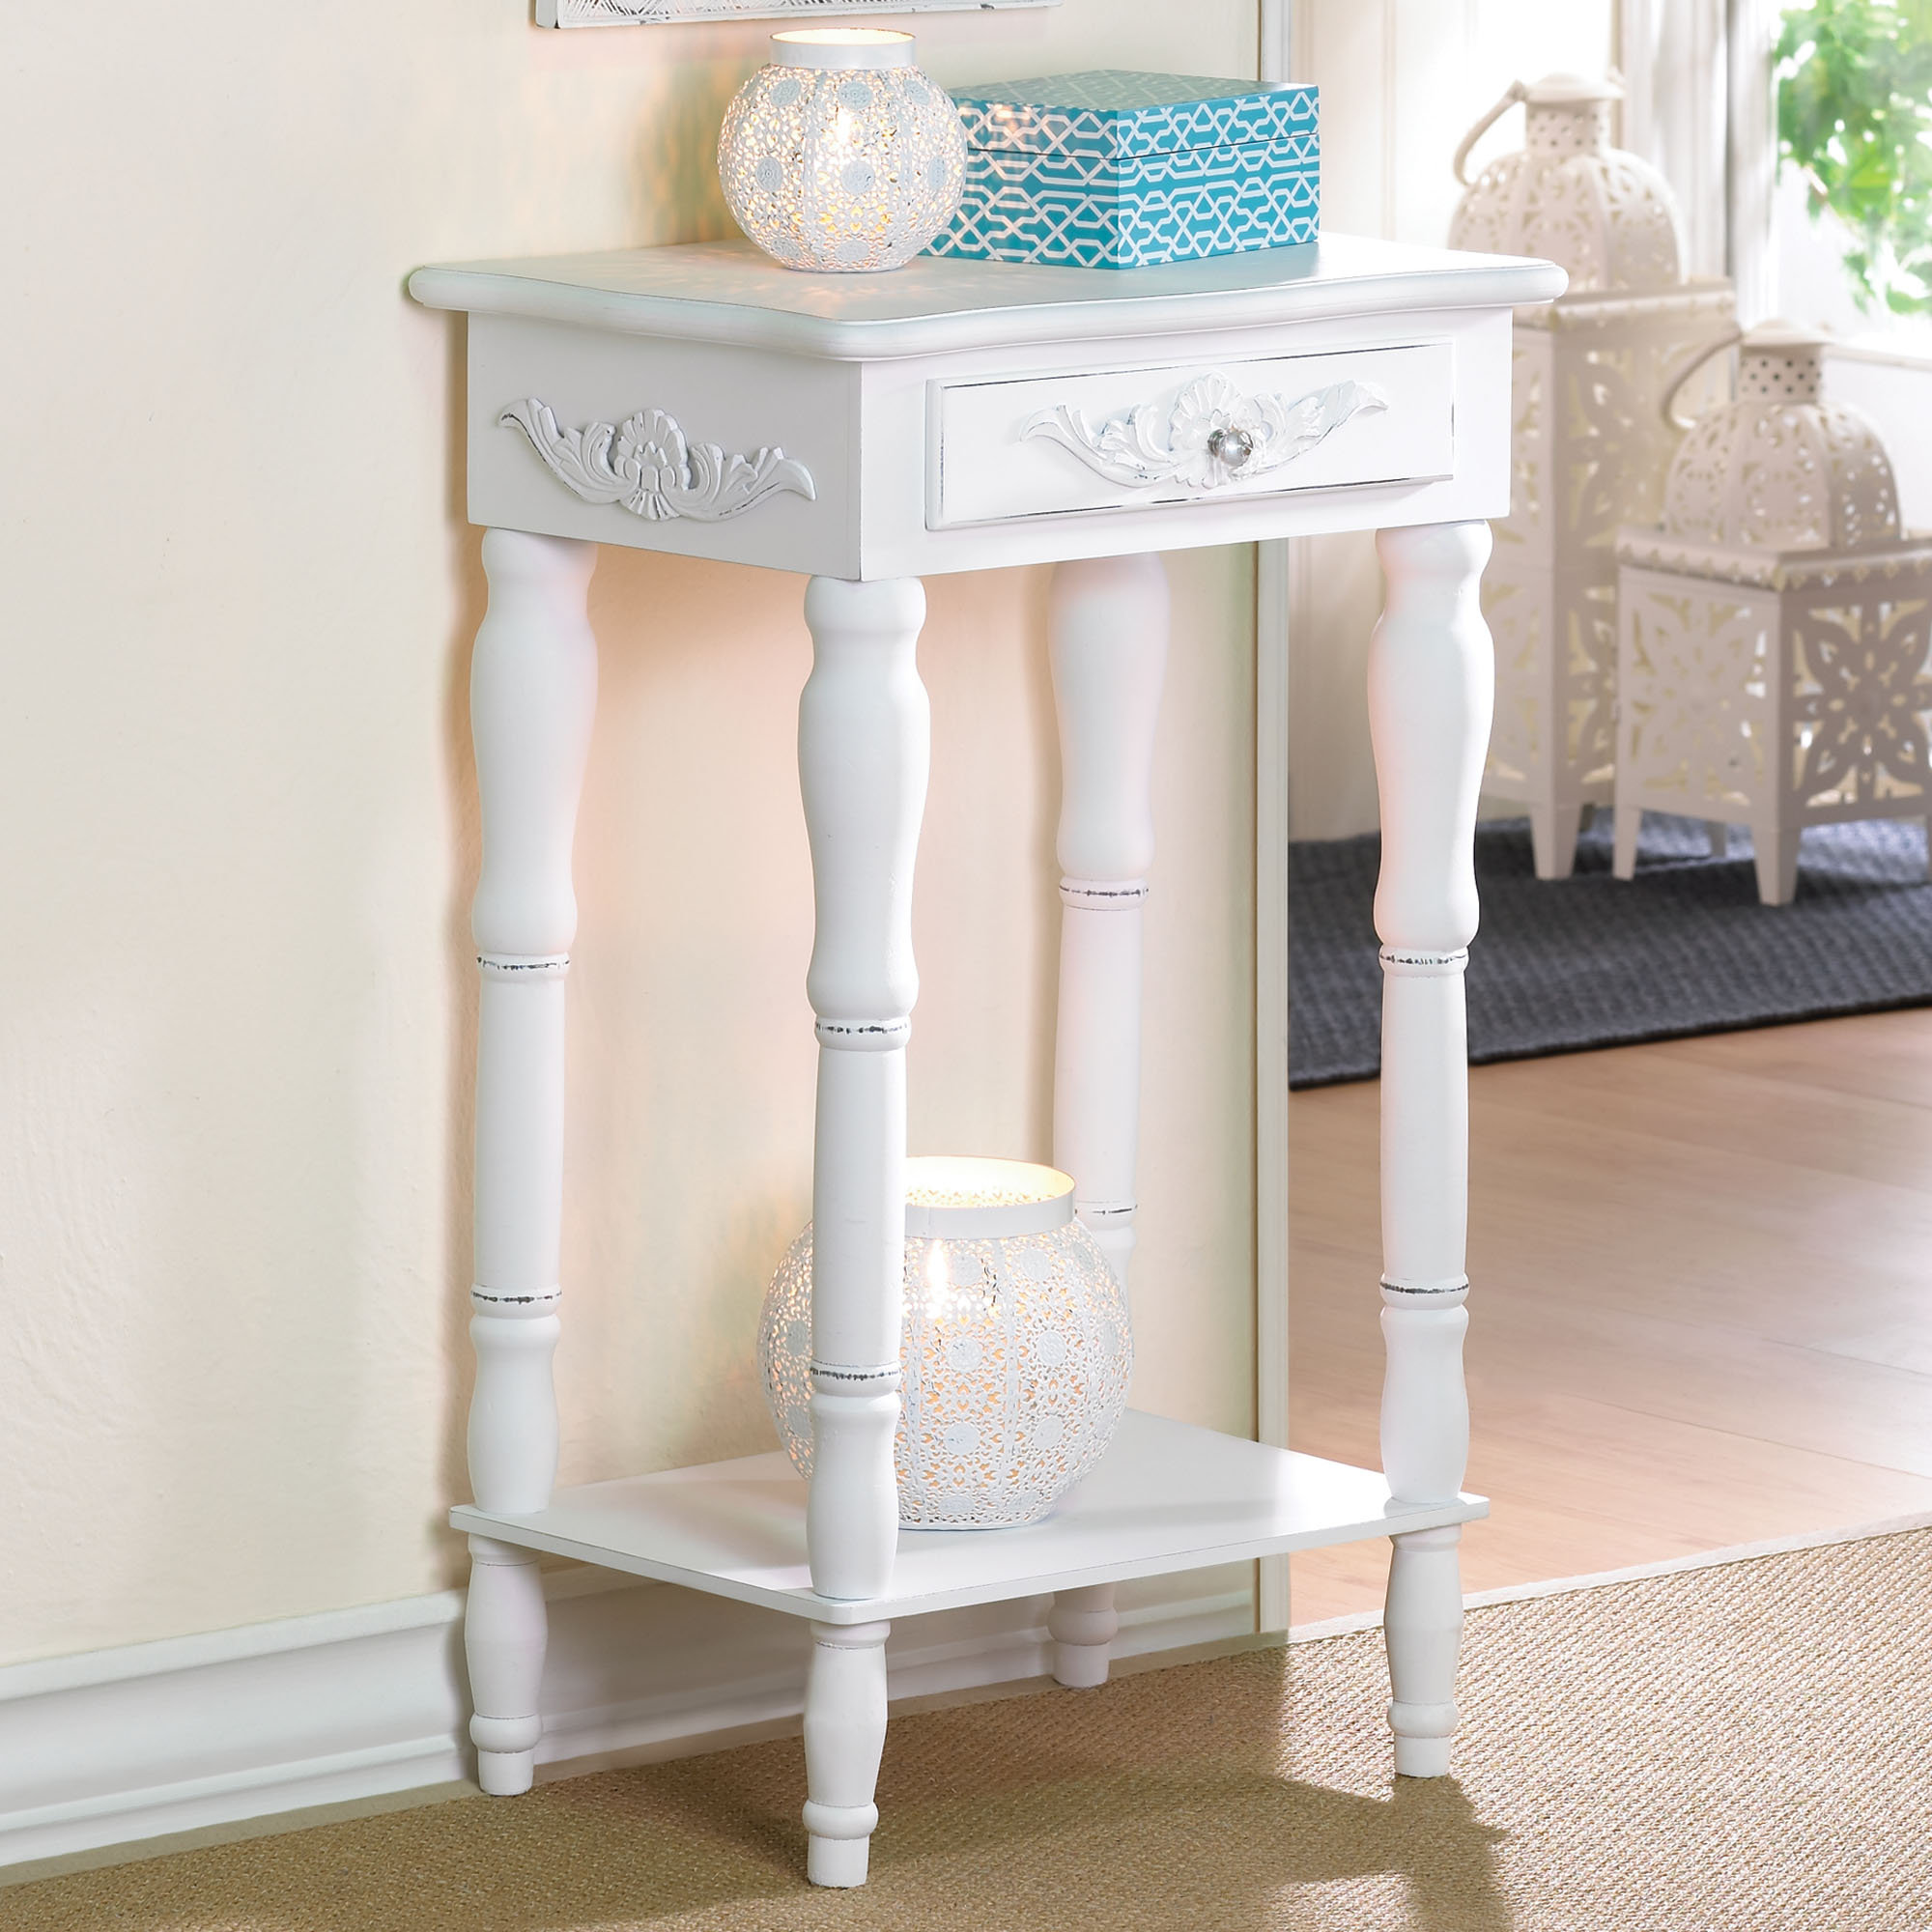 tall accent table stylish item for utilizing the empty space white classic with shelf underneath and small drawer brass black mirrored bedside cabinets windham storage cabinet